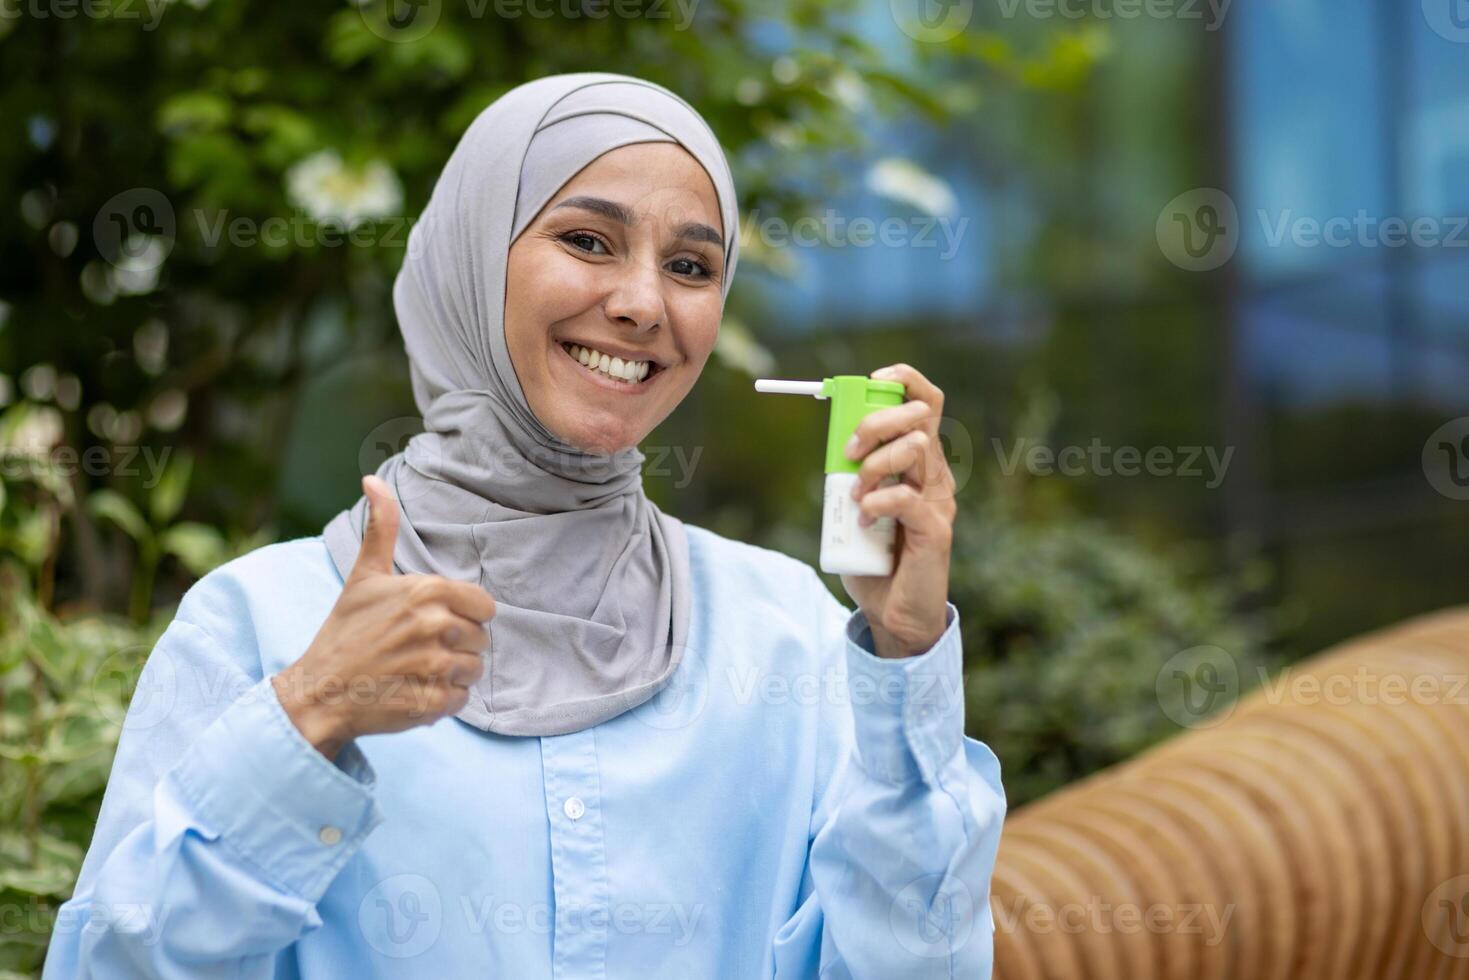 A cheerful Muslim woman in a hijab holds a throat spray bottle and gives a thumbs up on a sunny day outdoors, showing health and well-being. photo